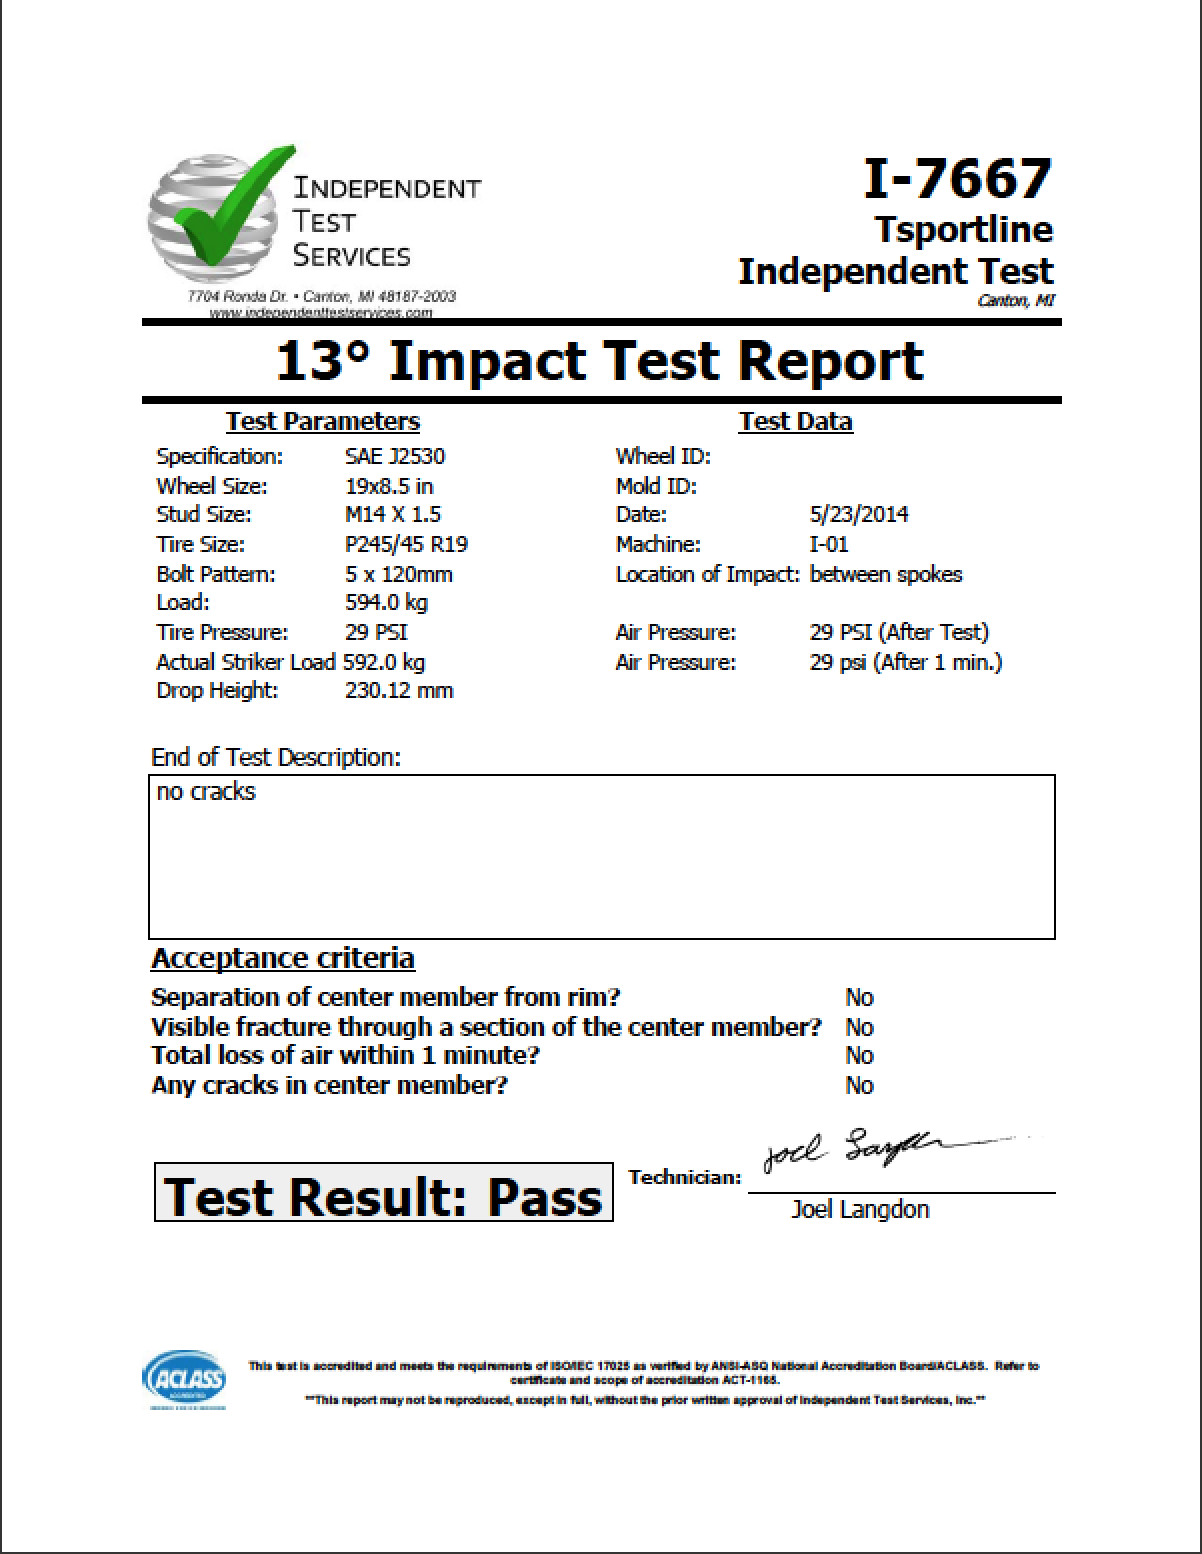 TST-Impact-Test-Report.png